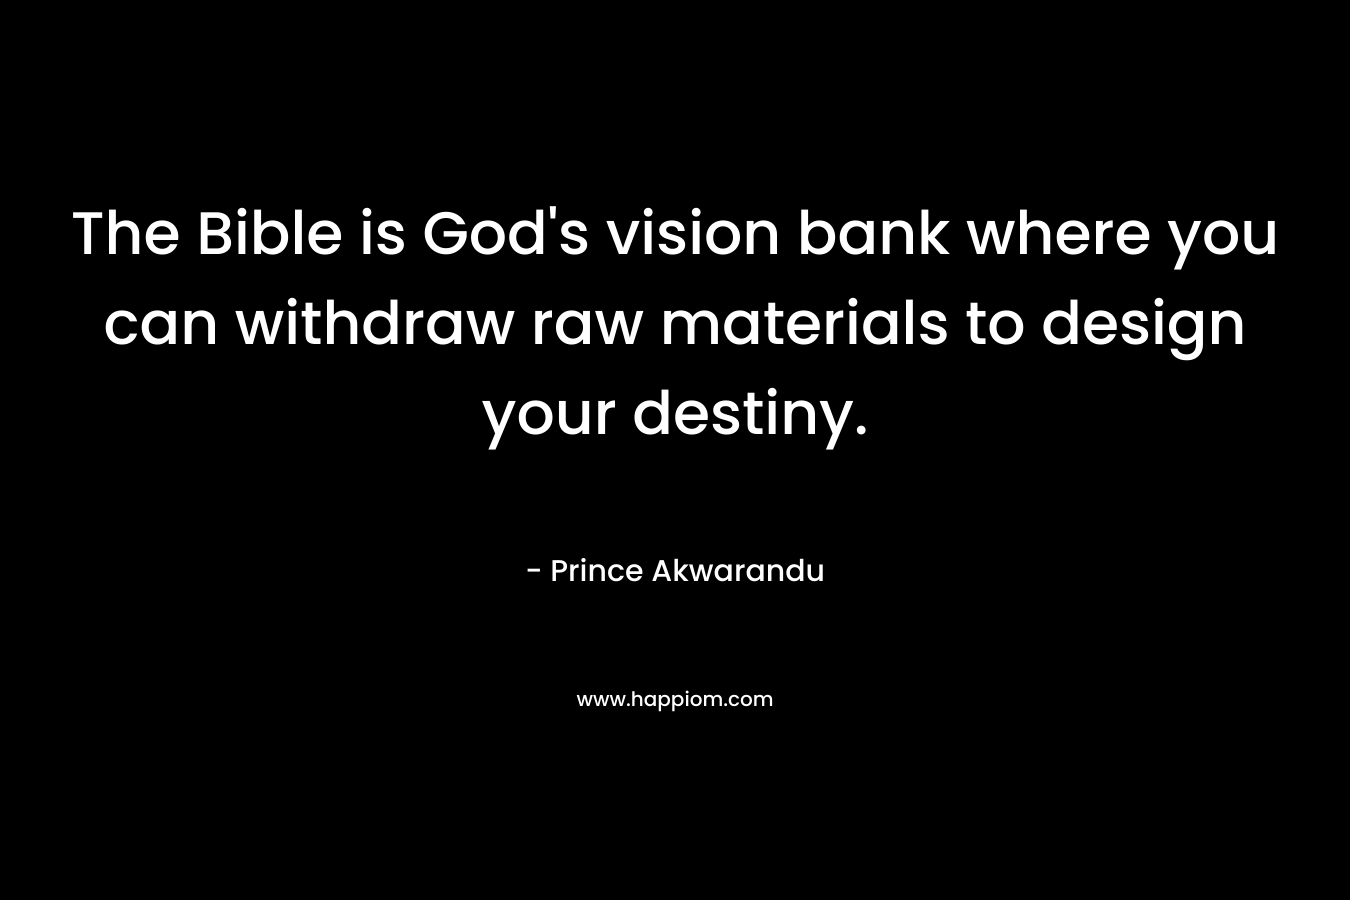 The Bible is God's vision bank where you can withdraw raw materials to design your destiny.